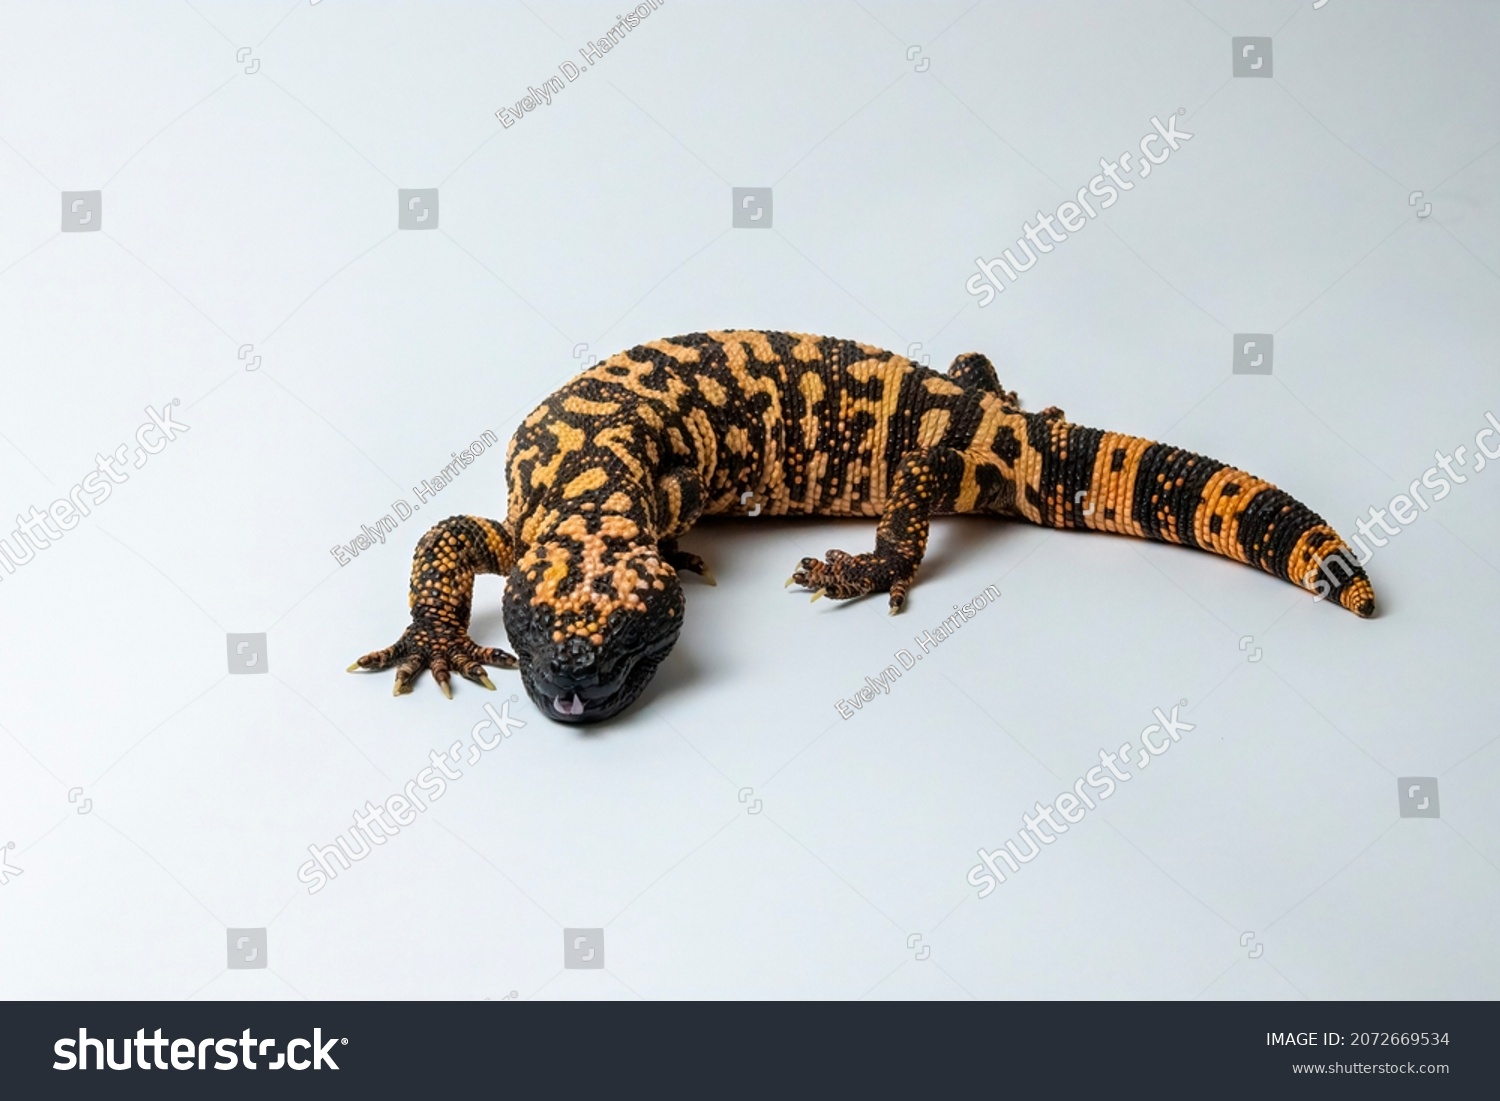 Hissing Gila Monster Lizard Isolated on White Background #2072669534